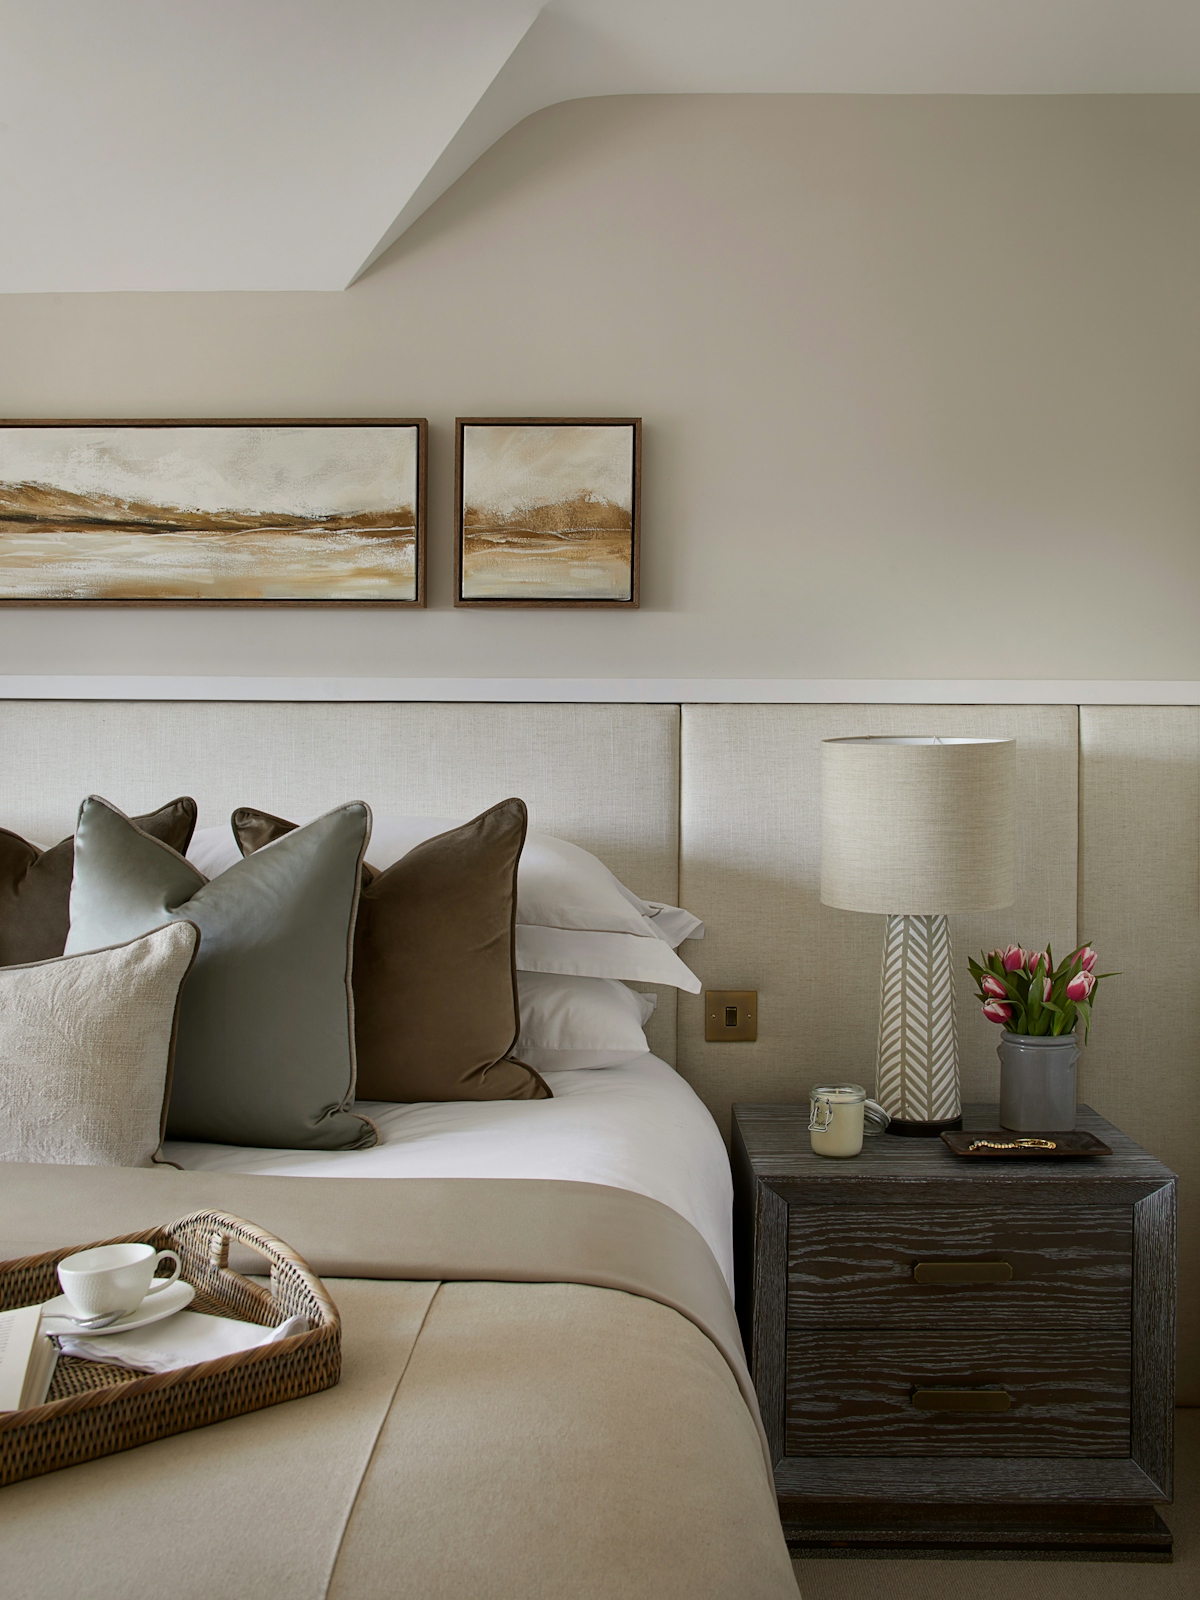 Neutral and inviting bedroom interior with Casper cushion and Headland Triptych by LuxDeco